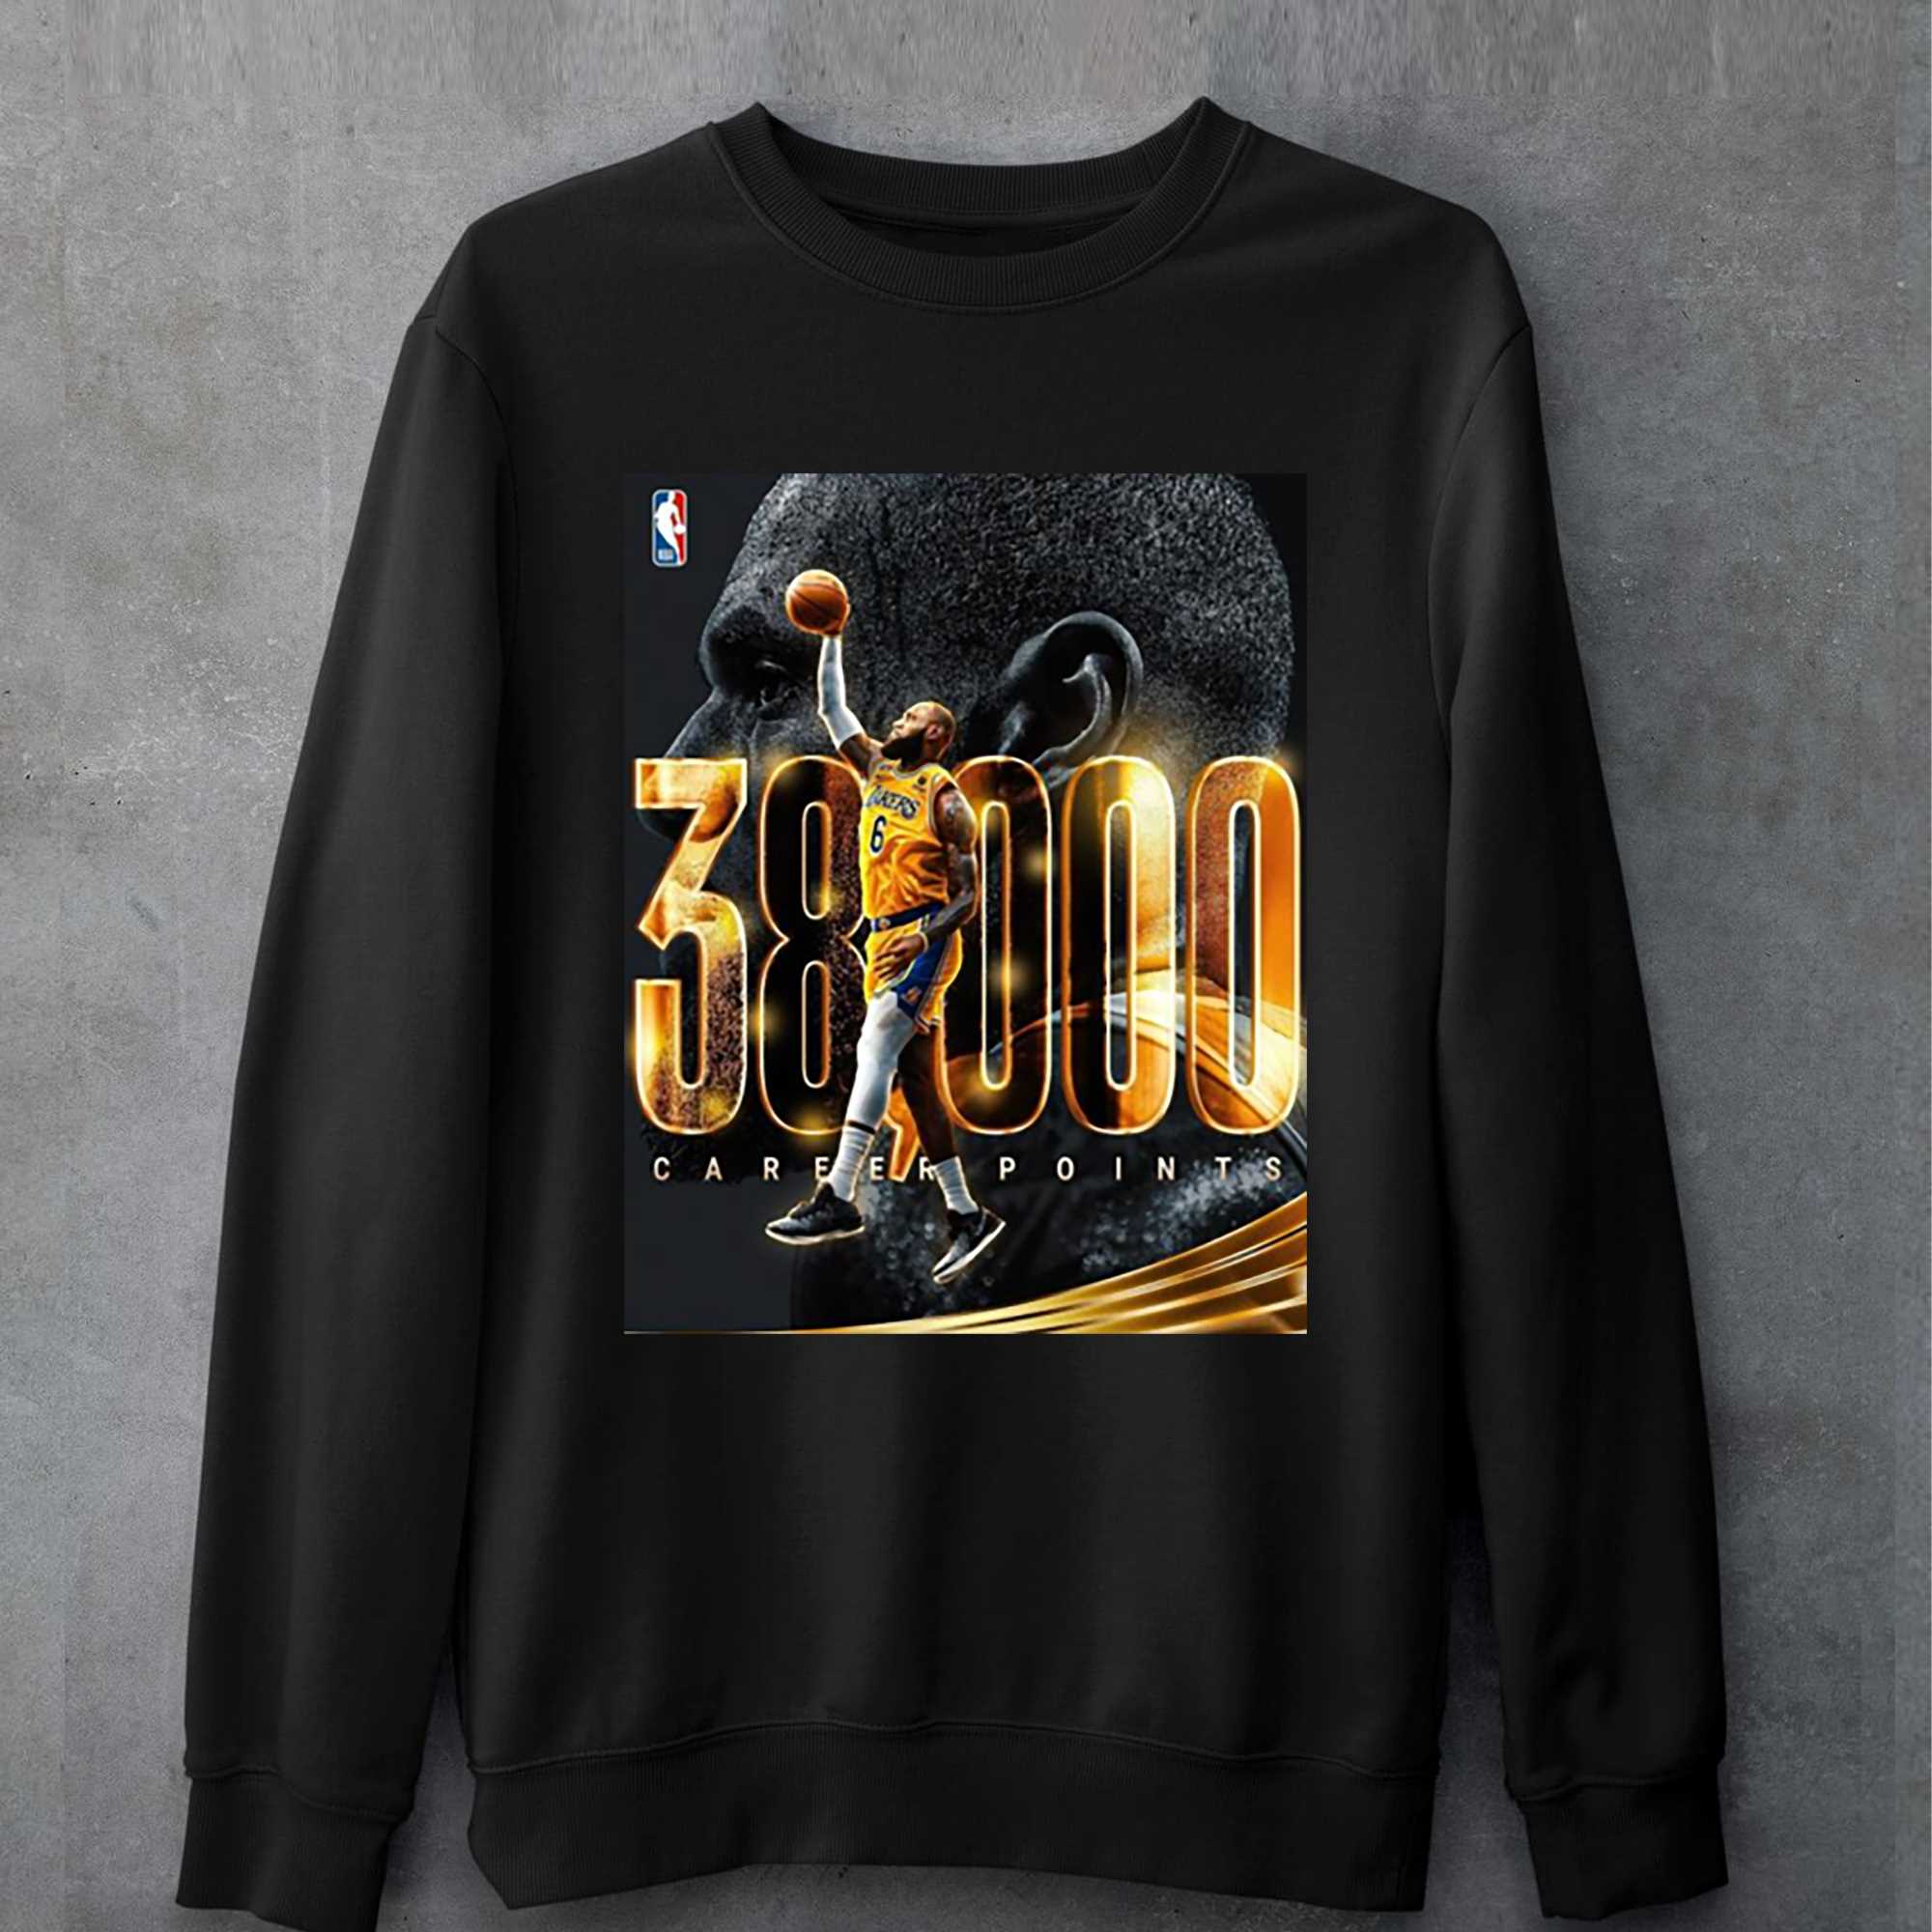 Lebron James Is The Second Player In Nba History To Score 38000 Career Points Shirt 